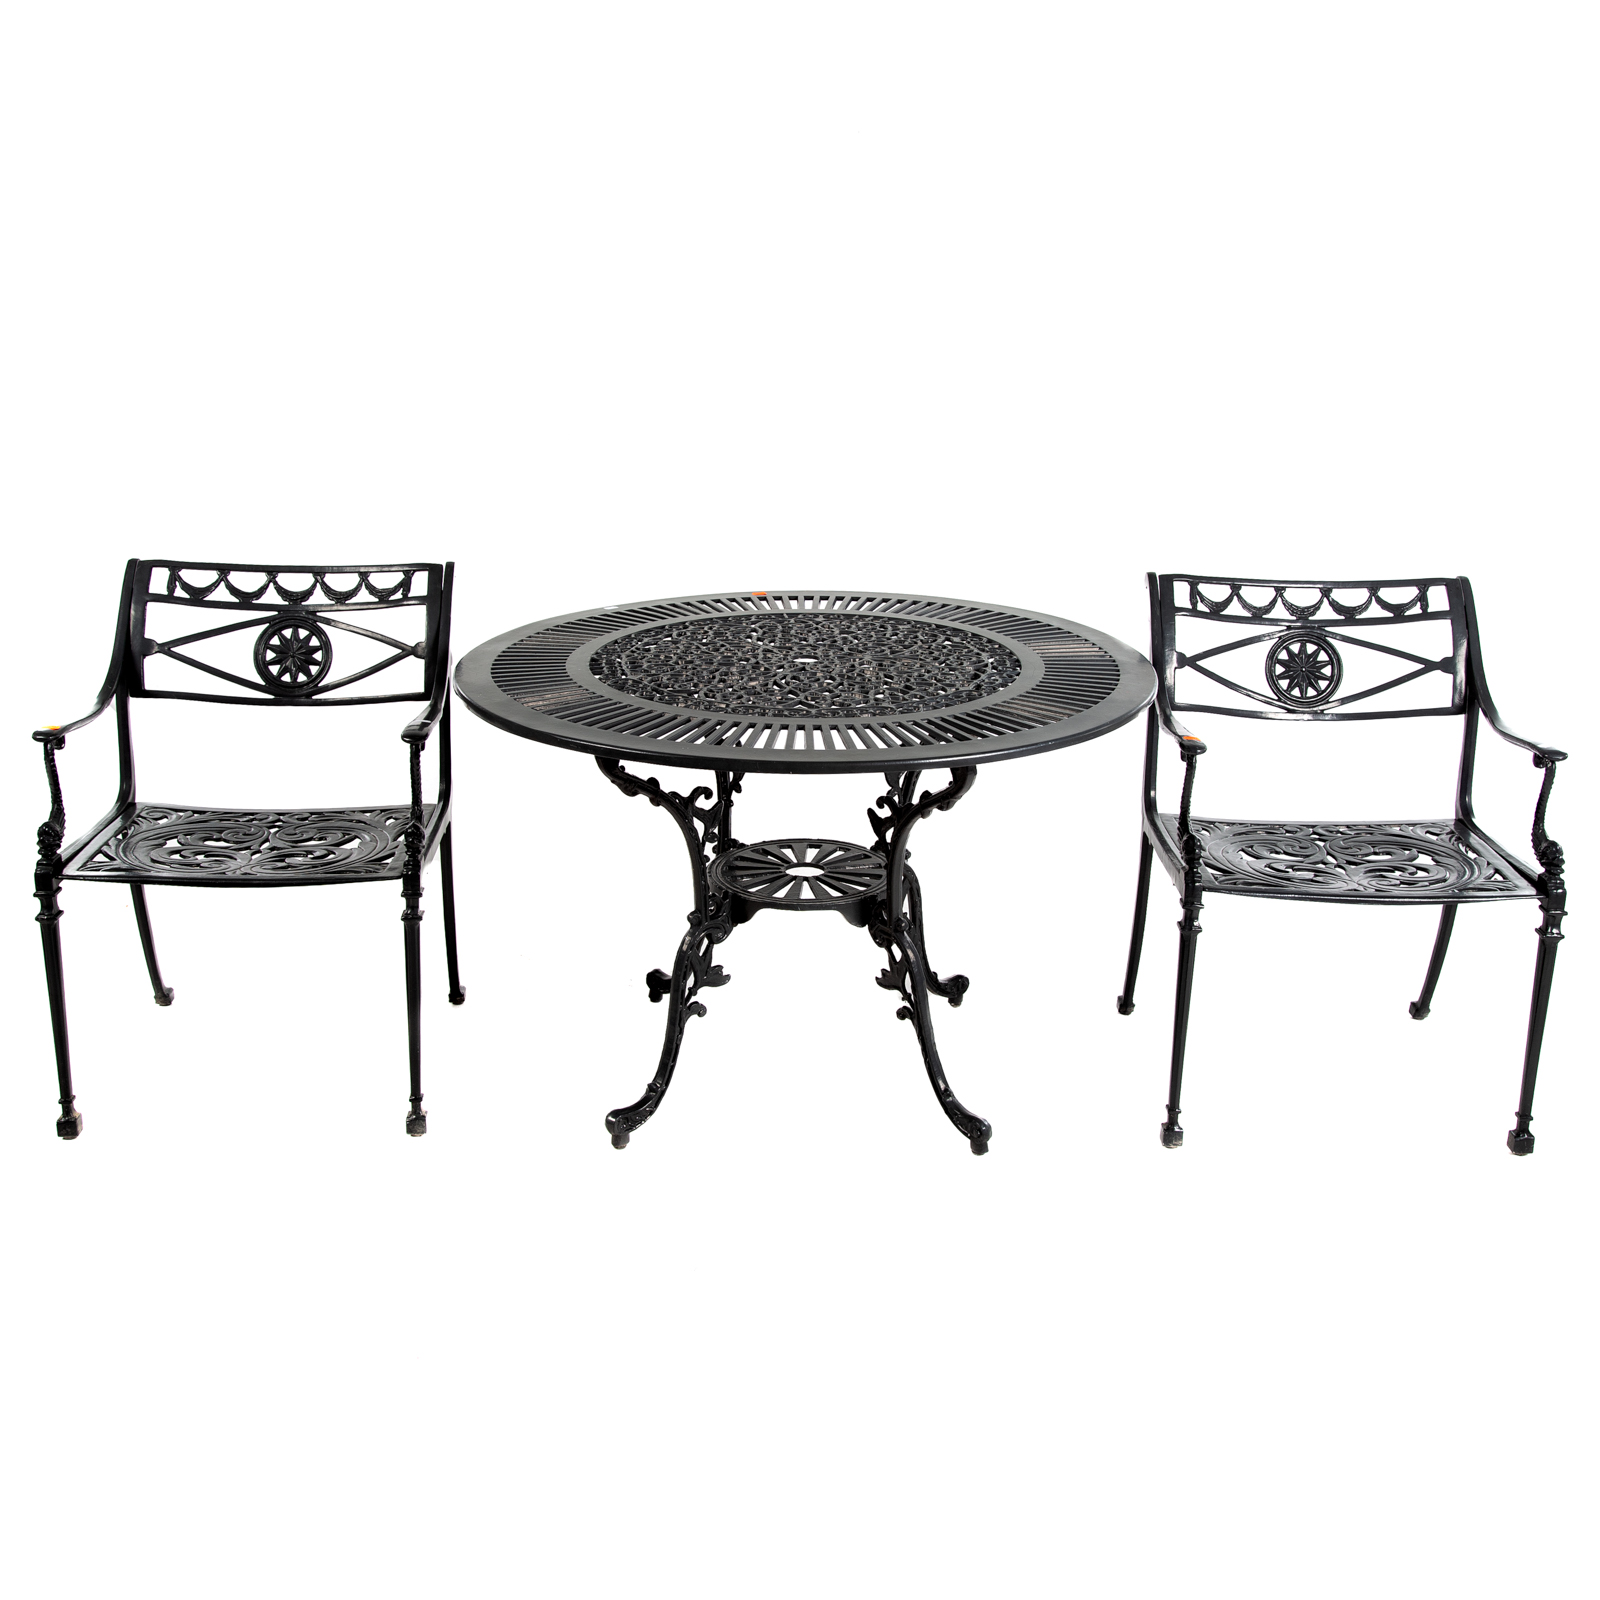 CLASSICAL STYLE METAL PATIO TABLE 2e90a1